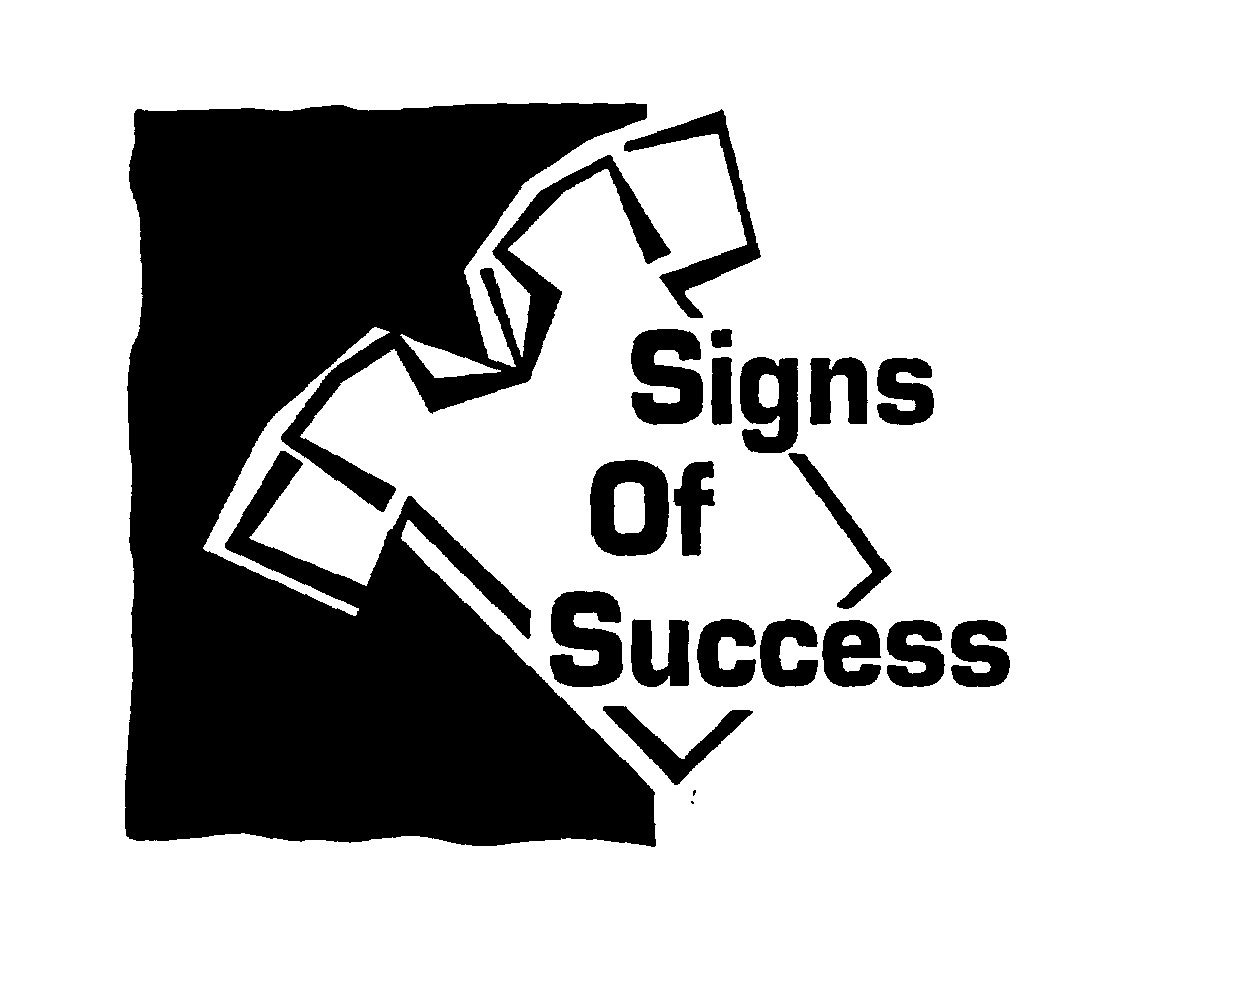  SIGNS OF SUCCESS